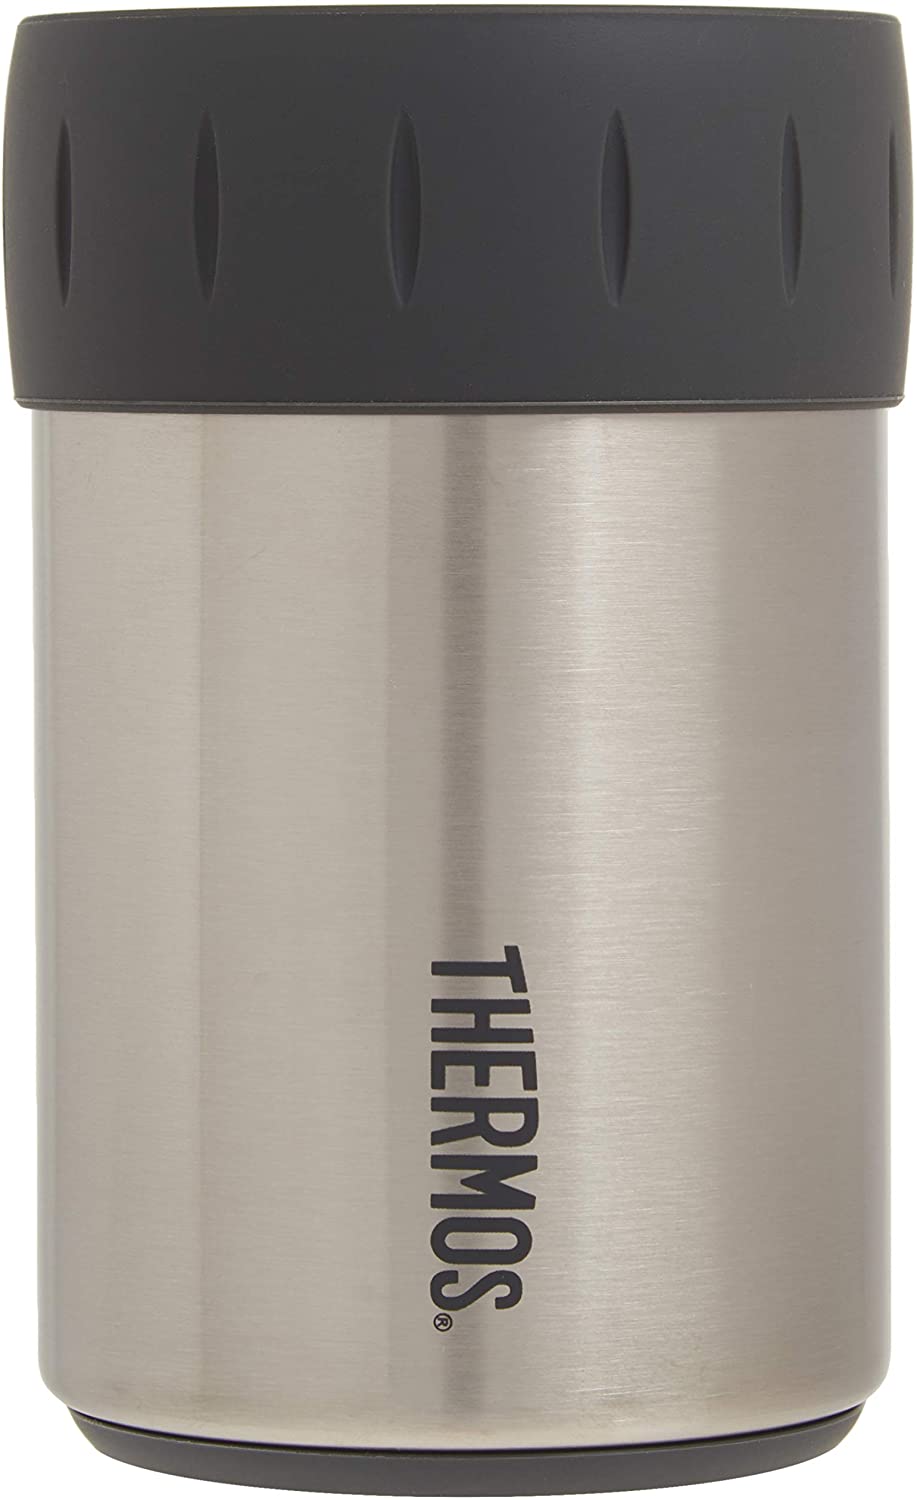 Thermos Can Insulator